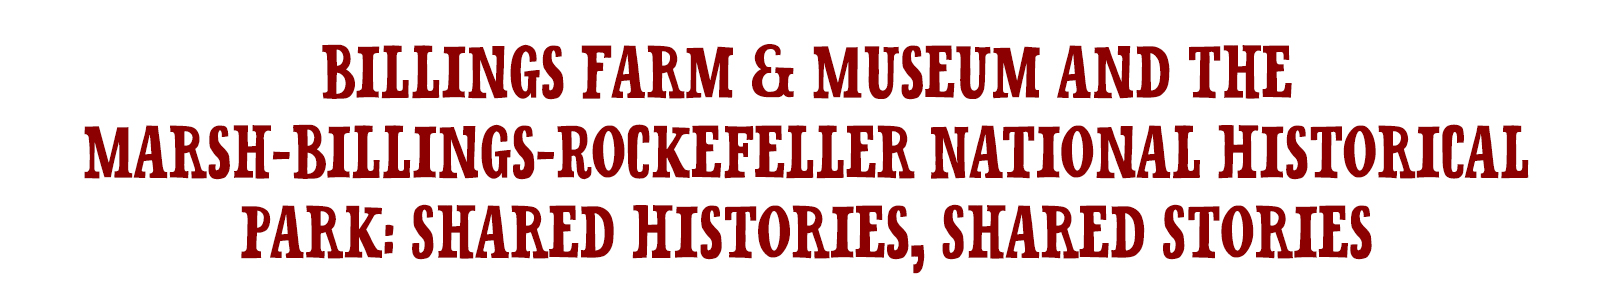 Billings Farm & Museum and the Marsh-Billings-Rockefeller National Historical Park- Shared Histories, Shared Stories Banner Page Title